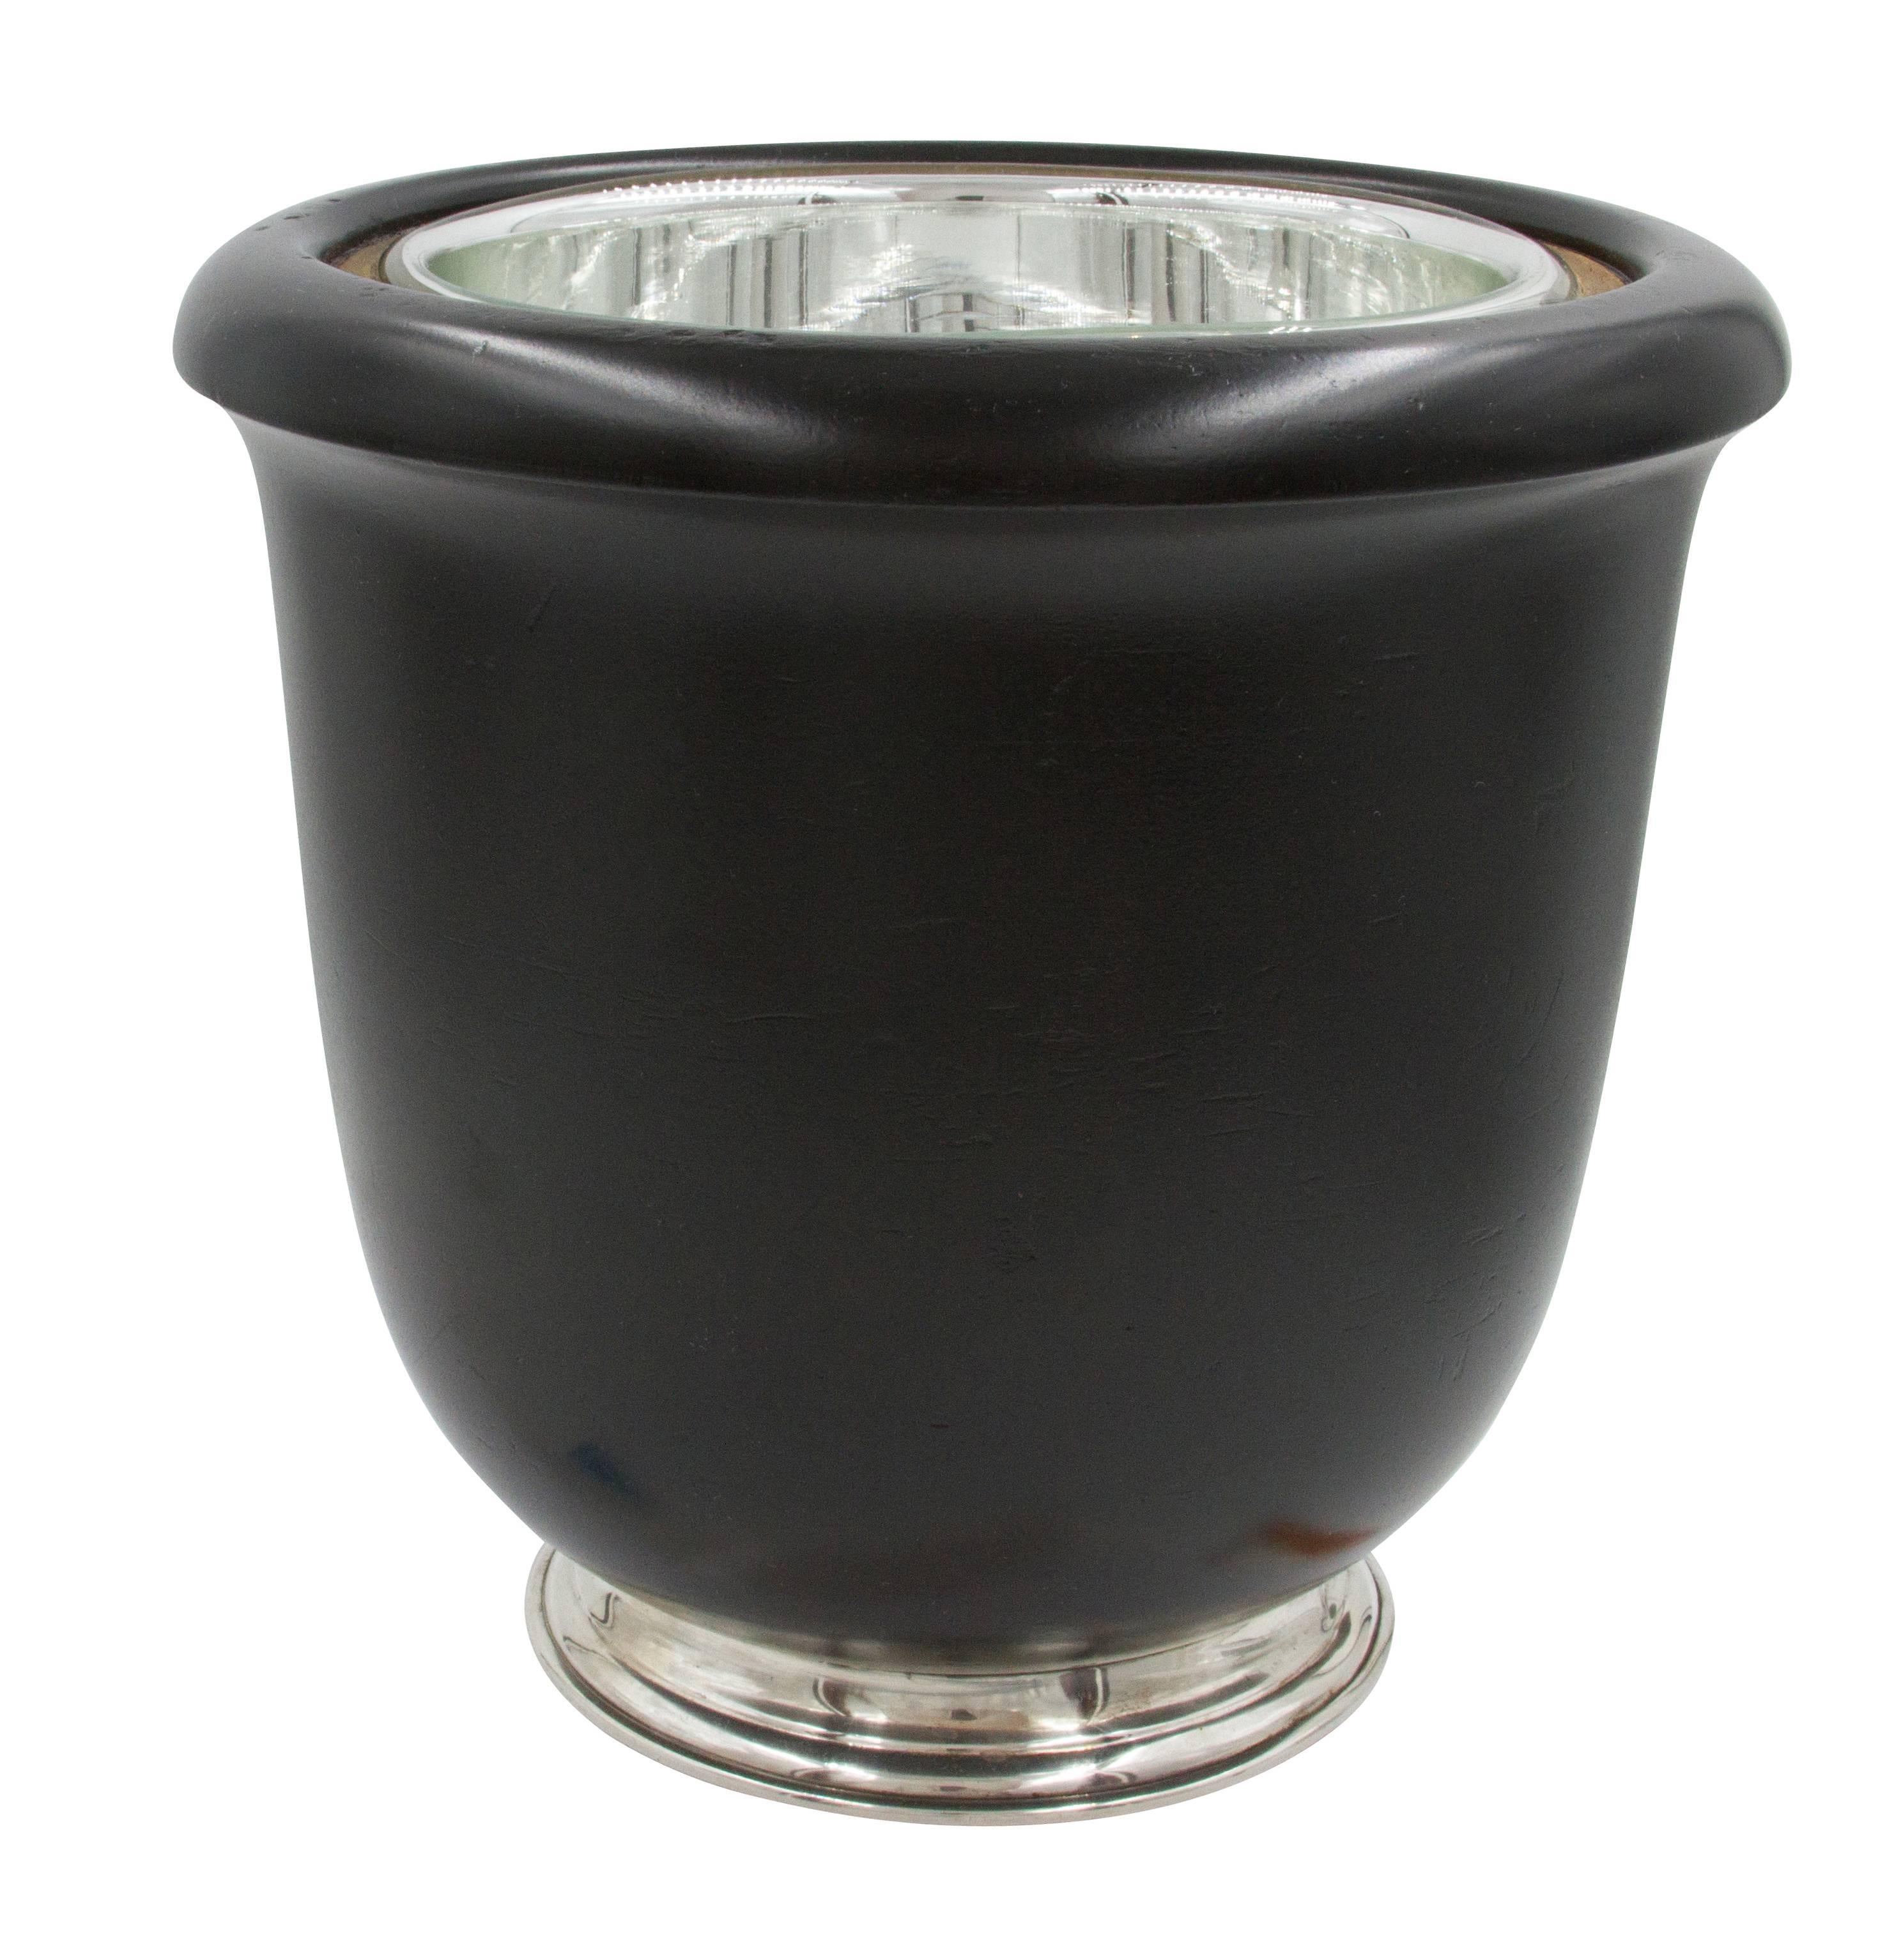 This Art Deco ice bucket has a sterling base and cover. The body is made of black wood. This unusual piece will definitely peak ever ones curiosity. If you like the rare and unusual this is your piece.